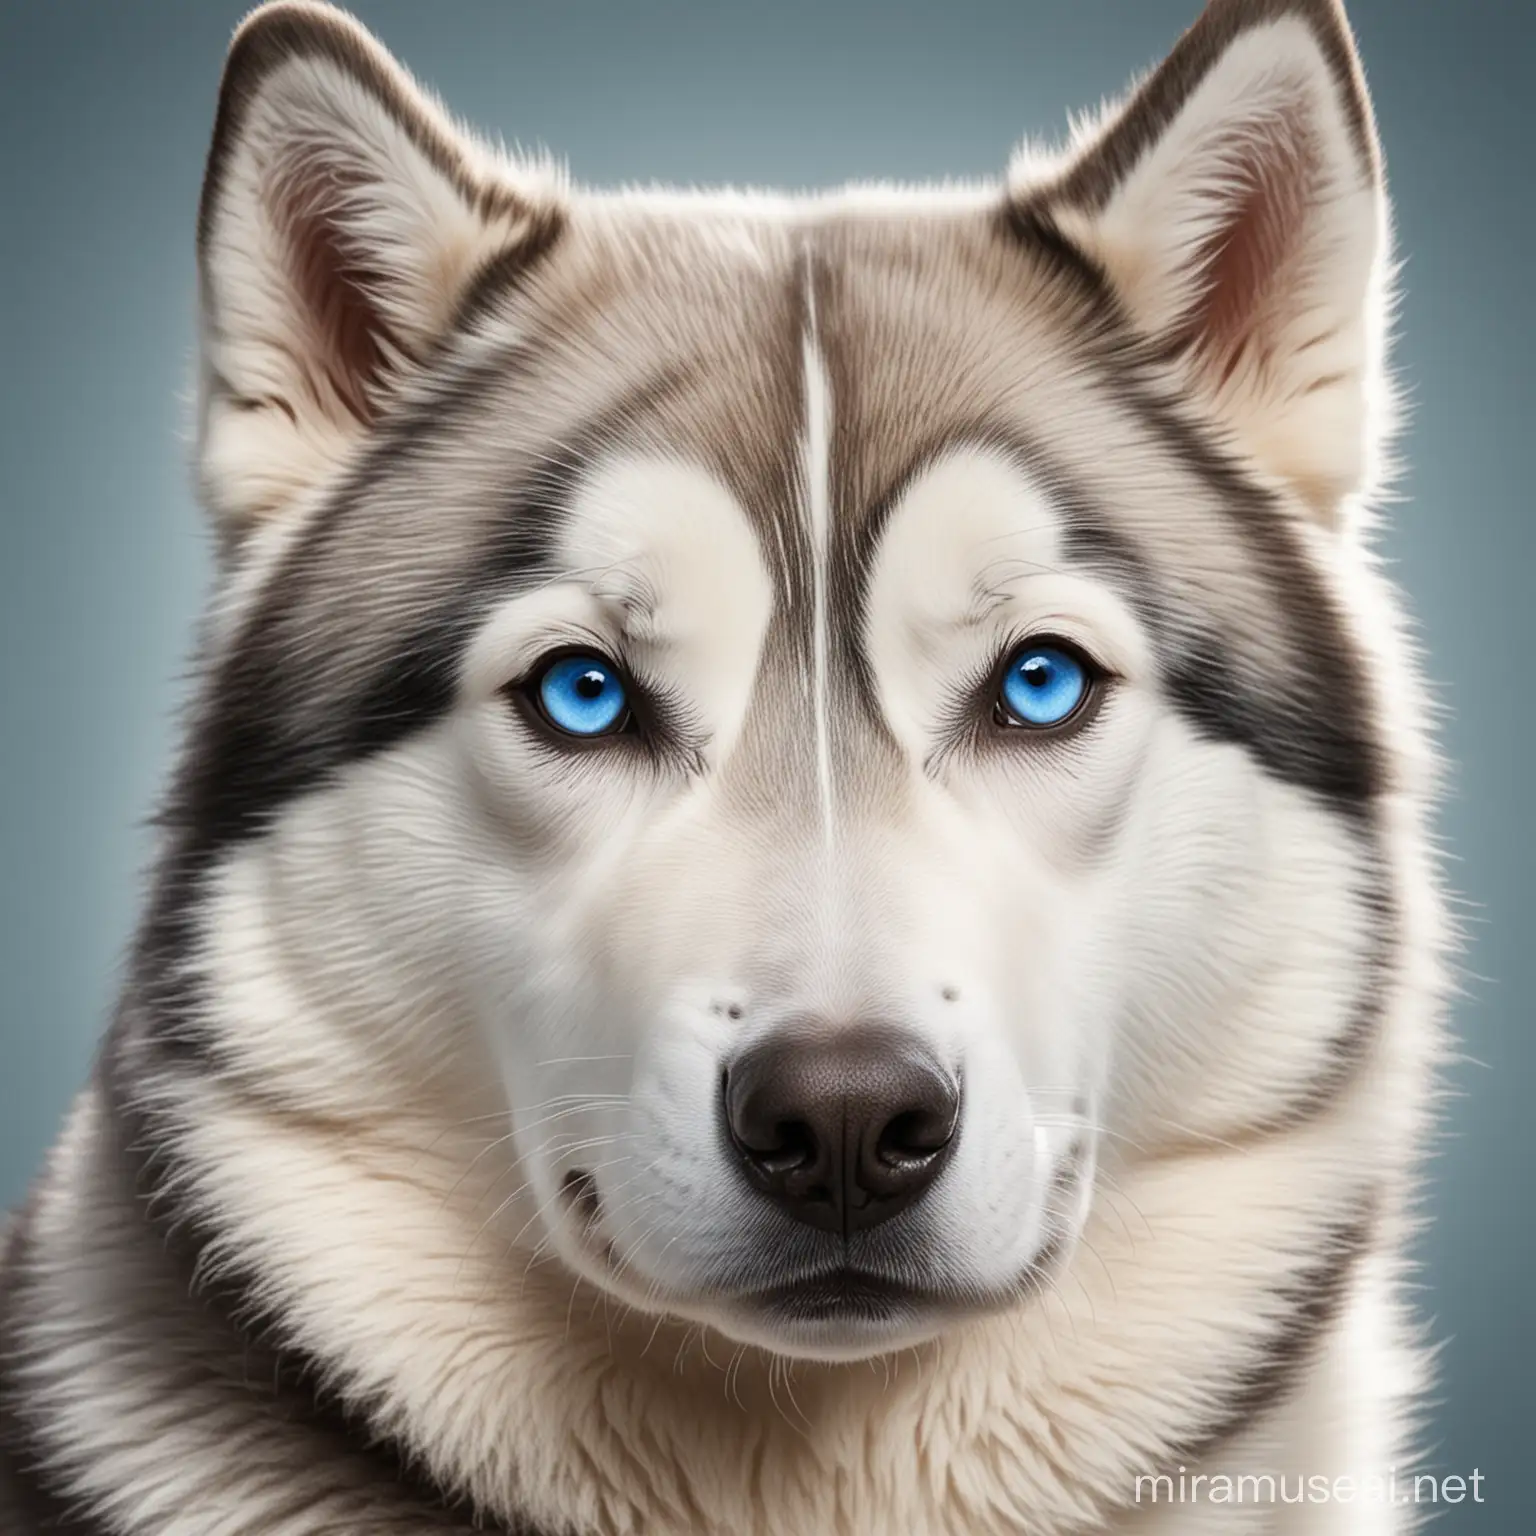 Stunning Illustration of a Gray Husky with Piercing Blue Eyes